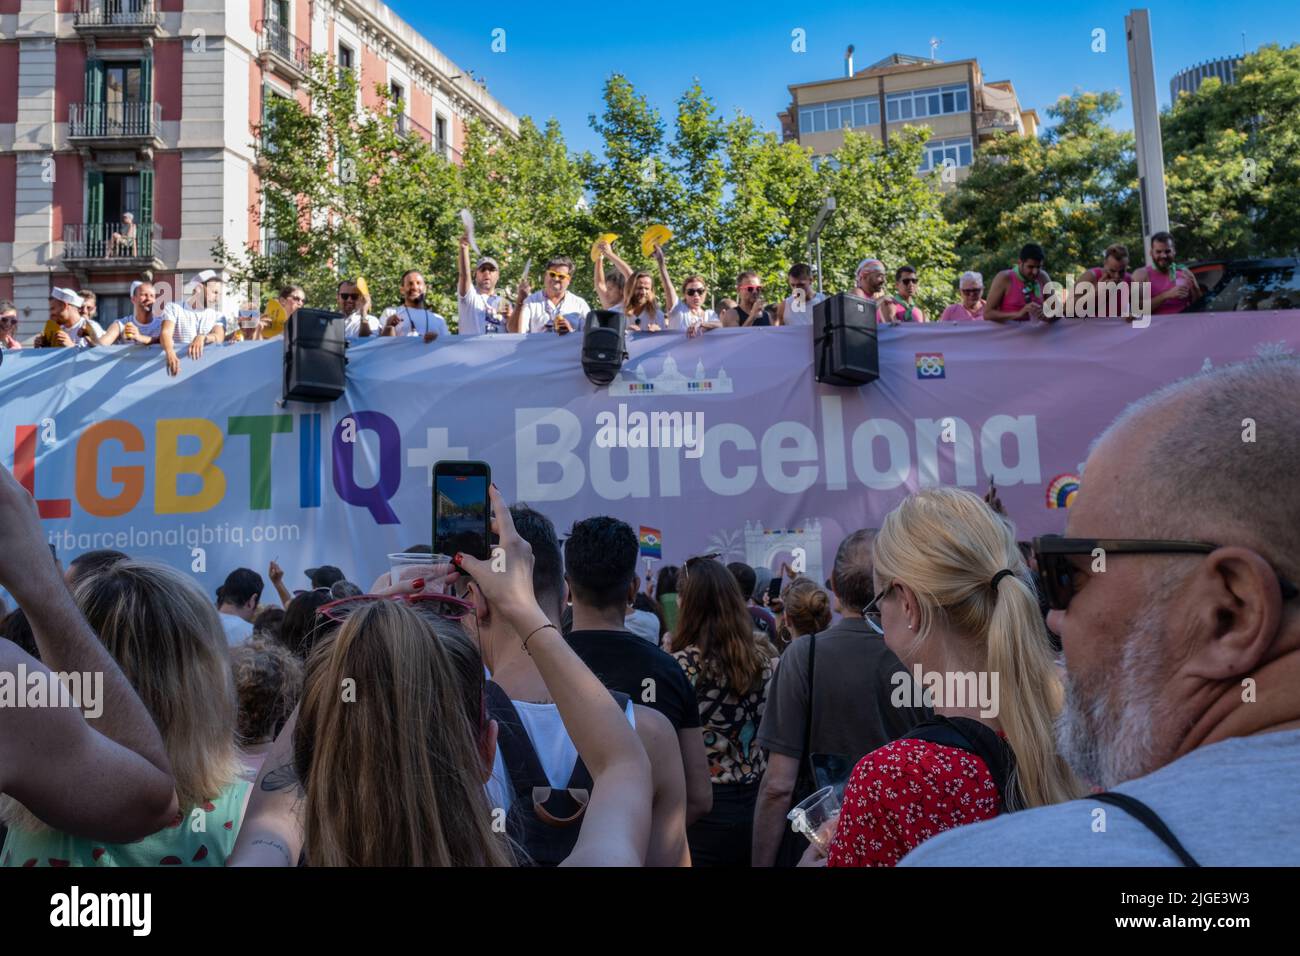 Barcelona, Spain - June 25, 2022: People watching the Pride parade. Rear view of a woman taking a photo as a float with the acronym LGBTIQ passes by. Stock Photo